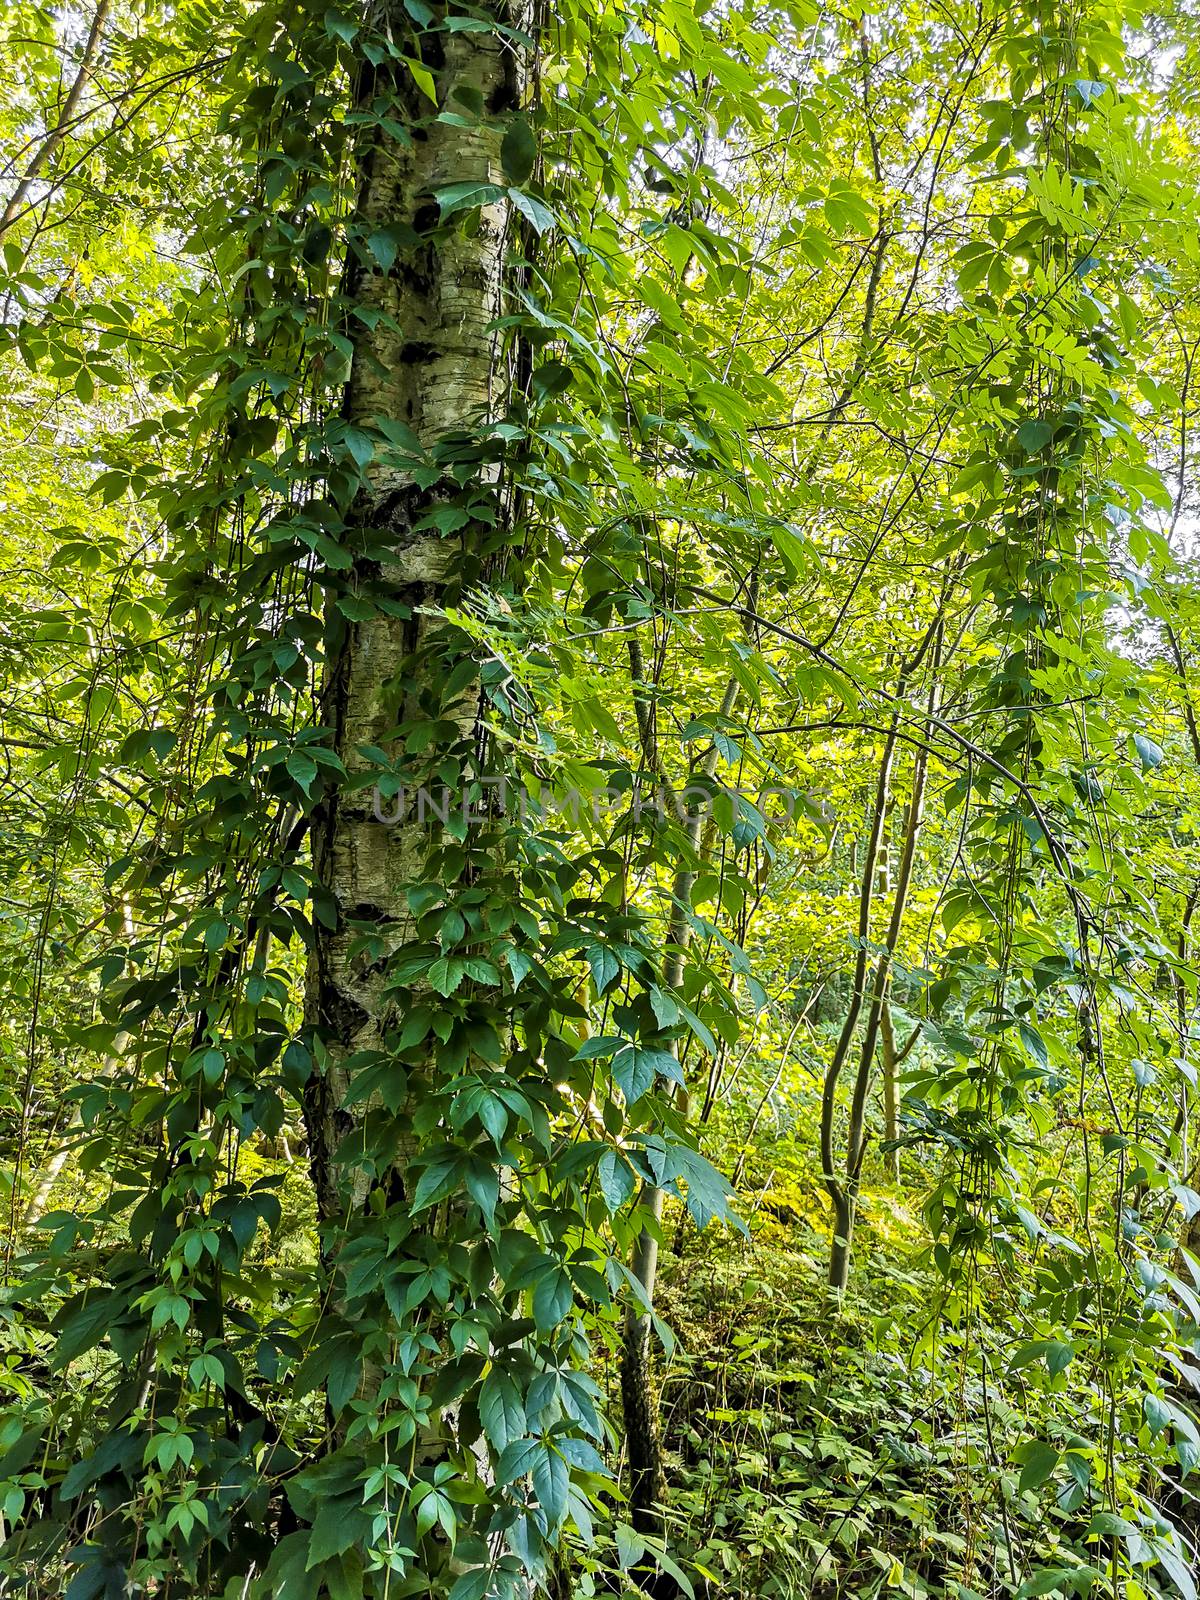 Climbing plants hang down from birch trees in the forest. by Arkadij